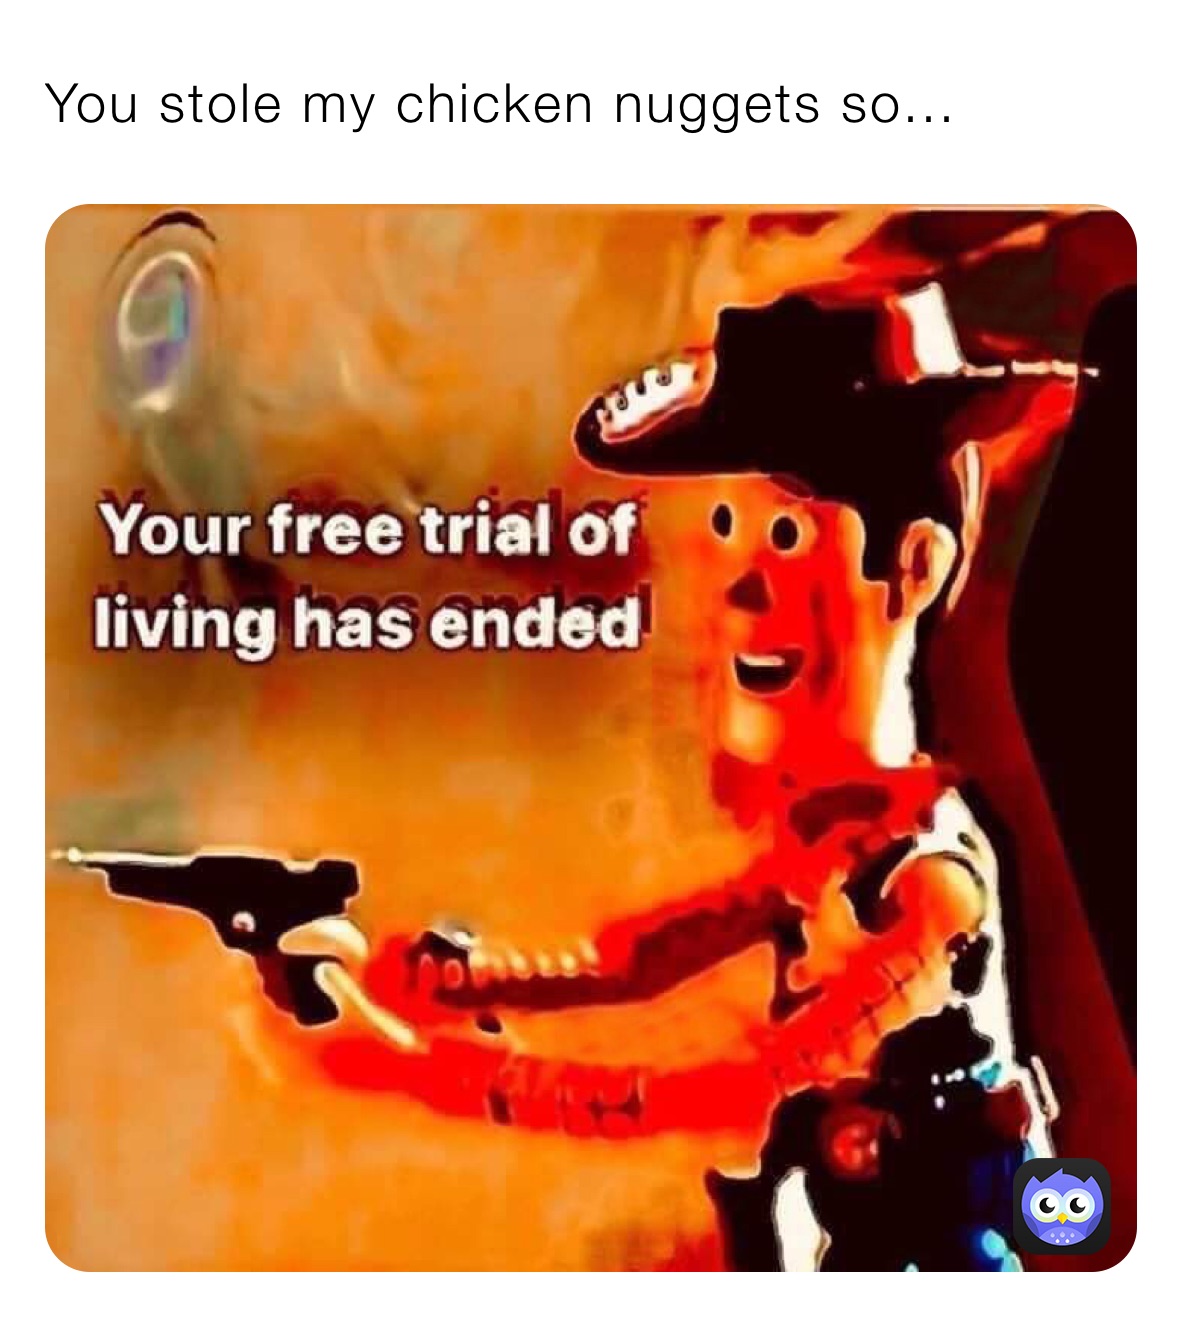 You stole my chicken nuggets so...